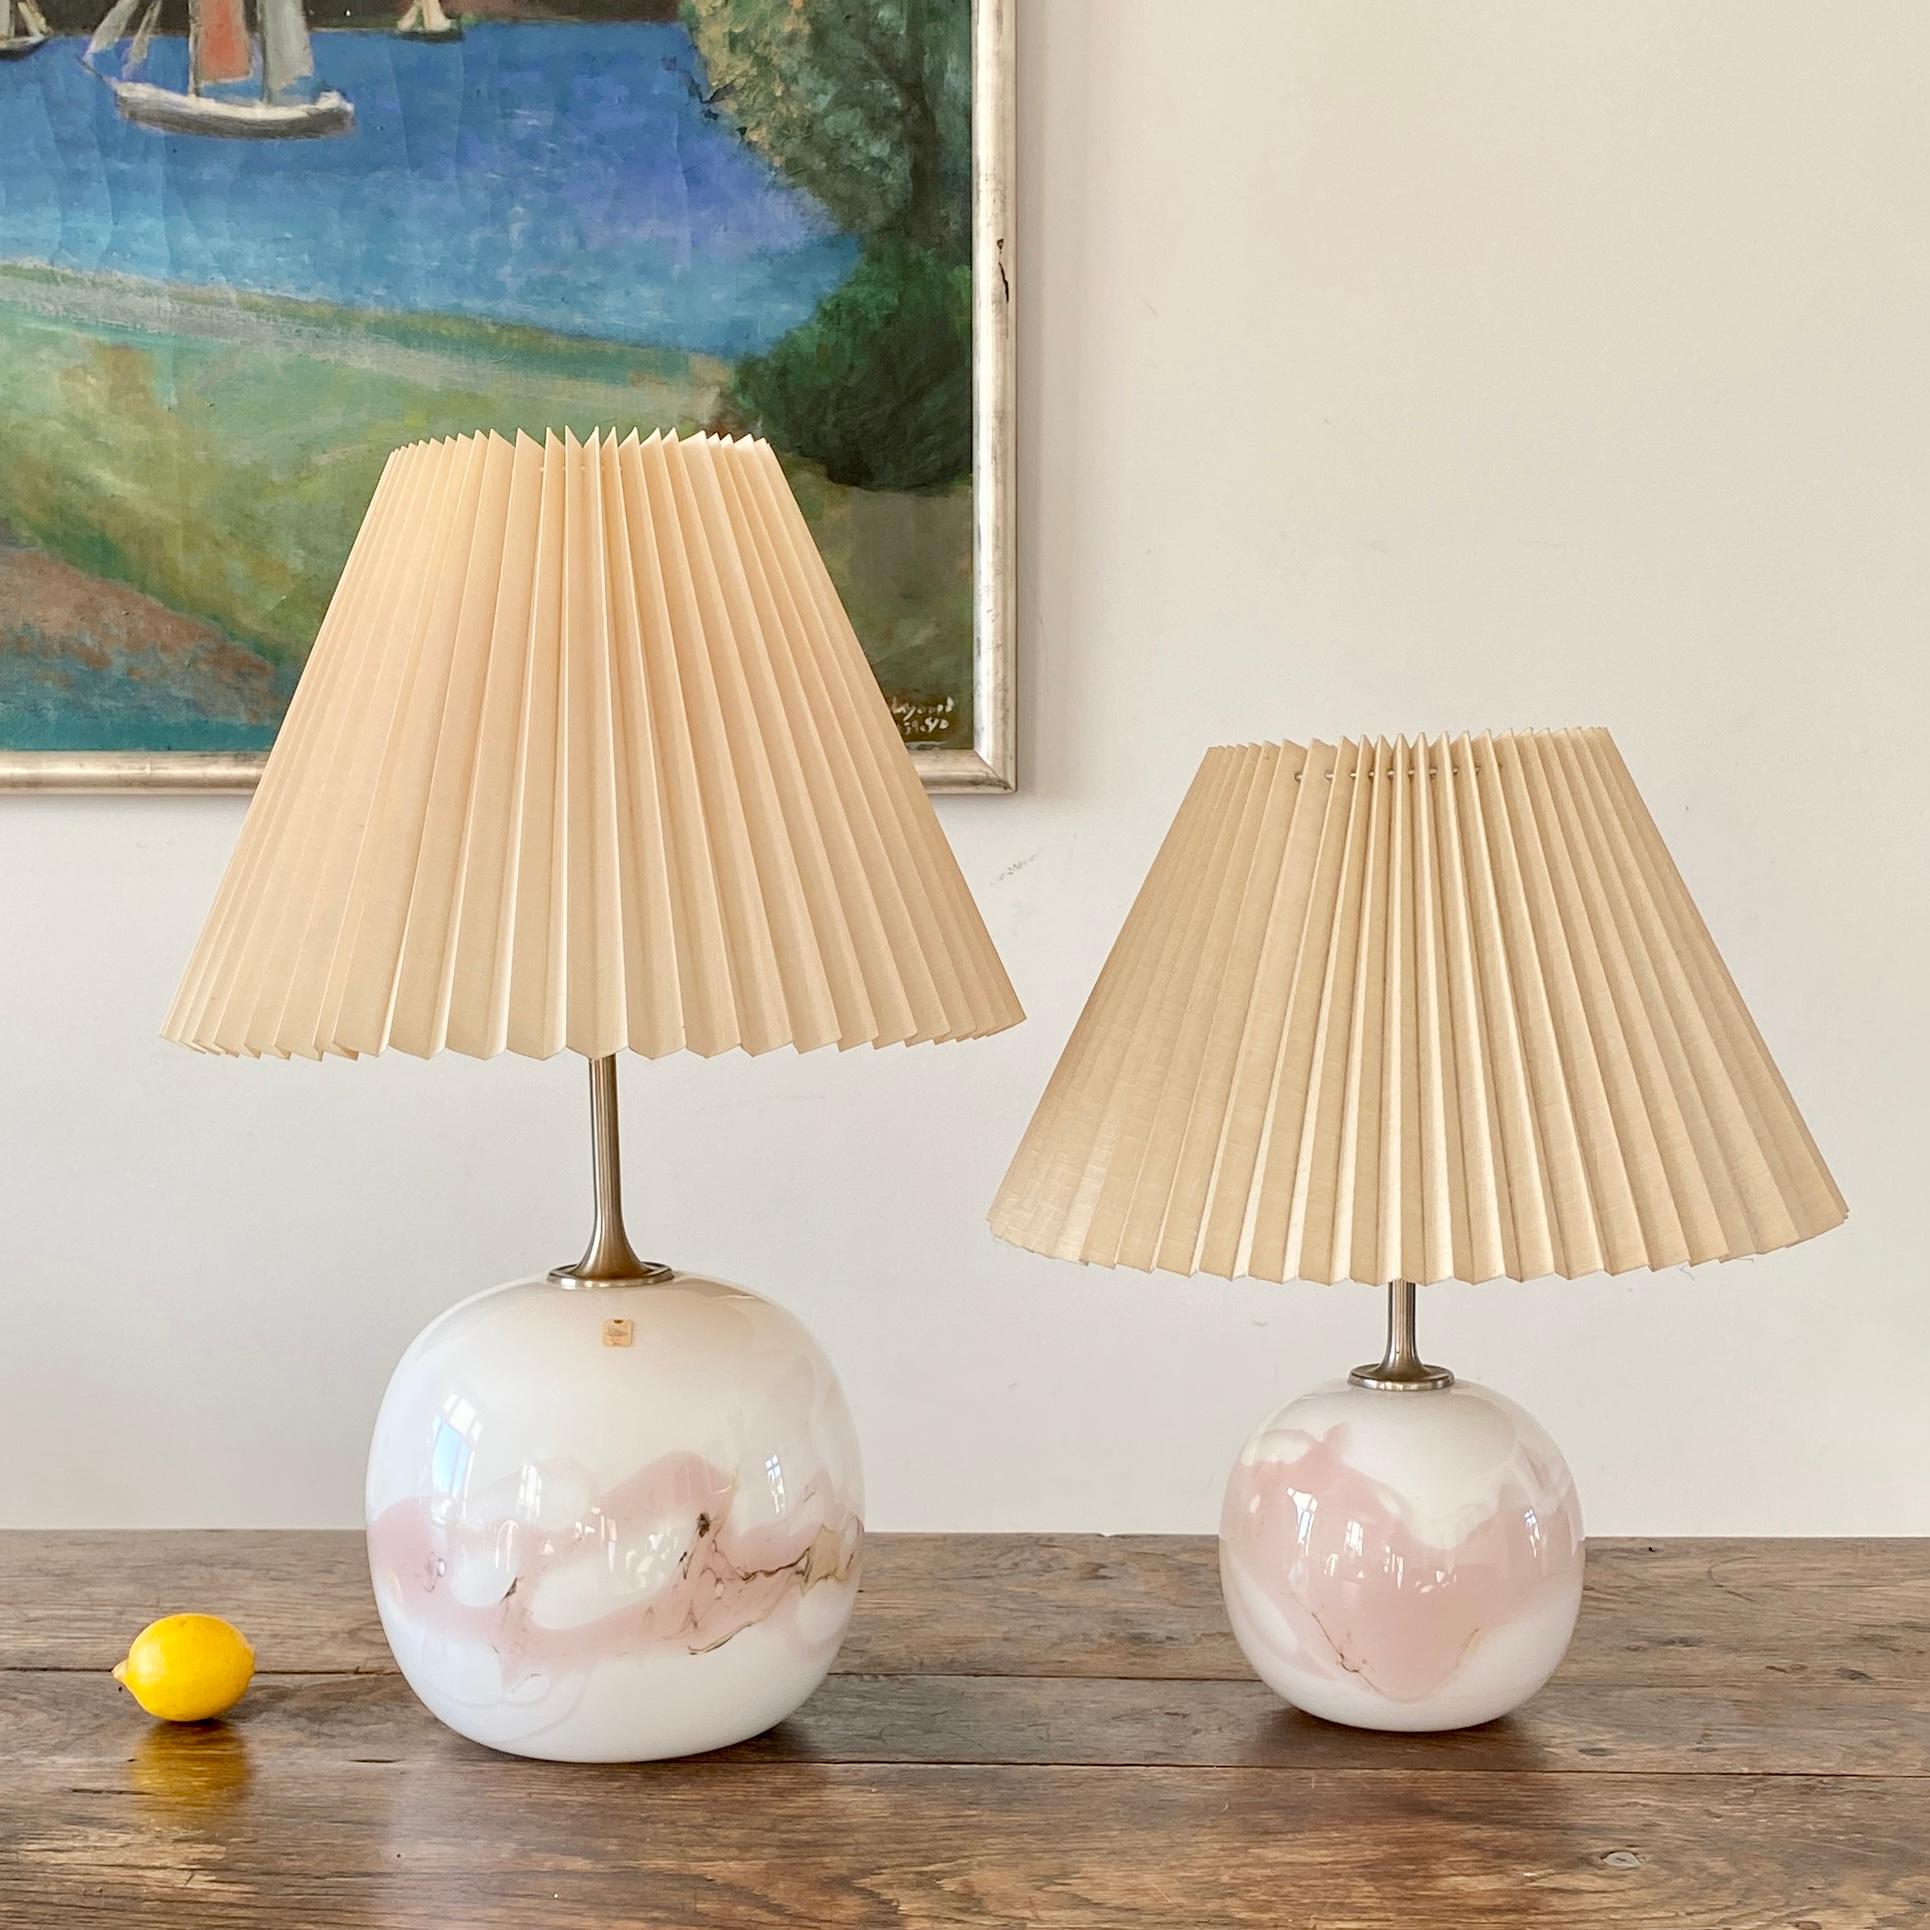 A pair of white and pink opaline Art Glass lamps by Michael Bang for Holmegaard. 

The 2 Sakura table lamp was designed by Michael Bang and was produced at Fyens Glasværk for Holmegaard Glasværk, when Holmegaard production still had production in